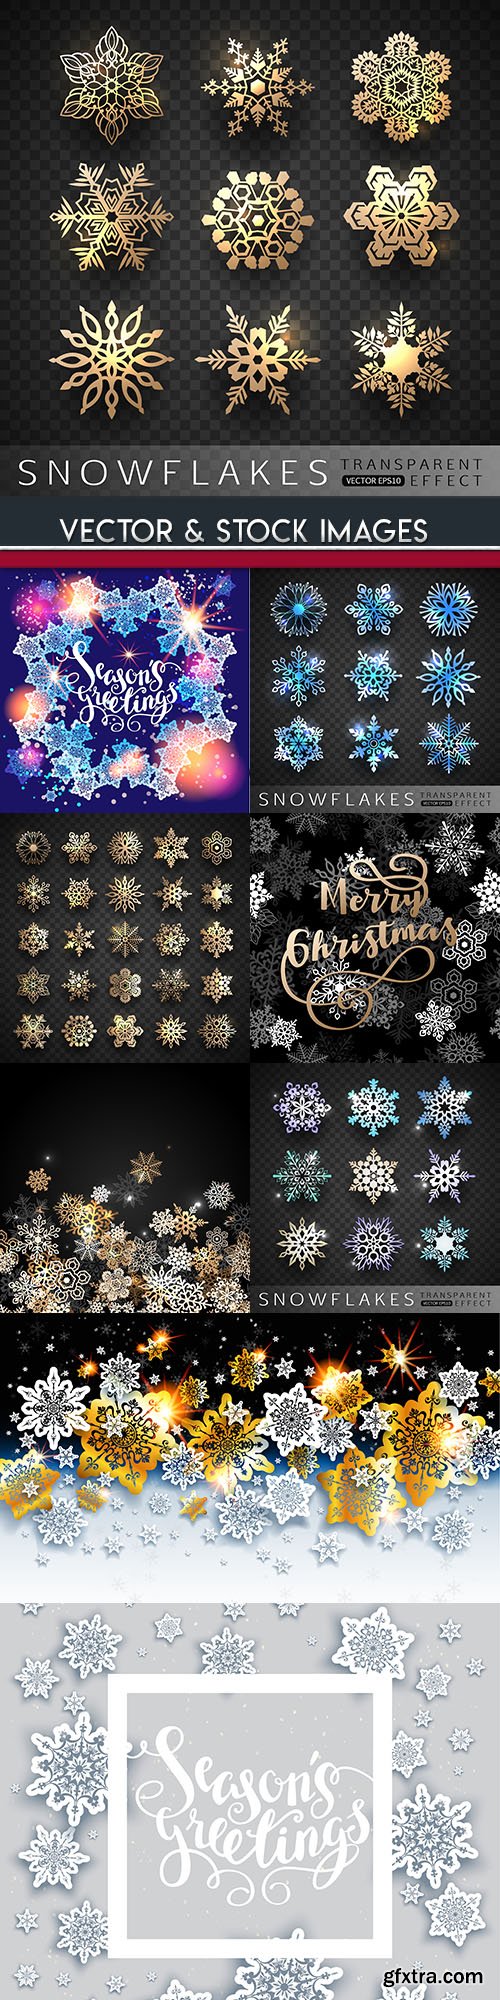 Snowflakes gold and silver Christmas backgrounds